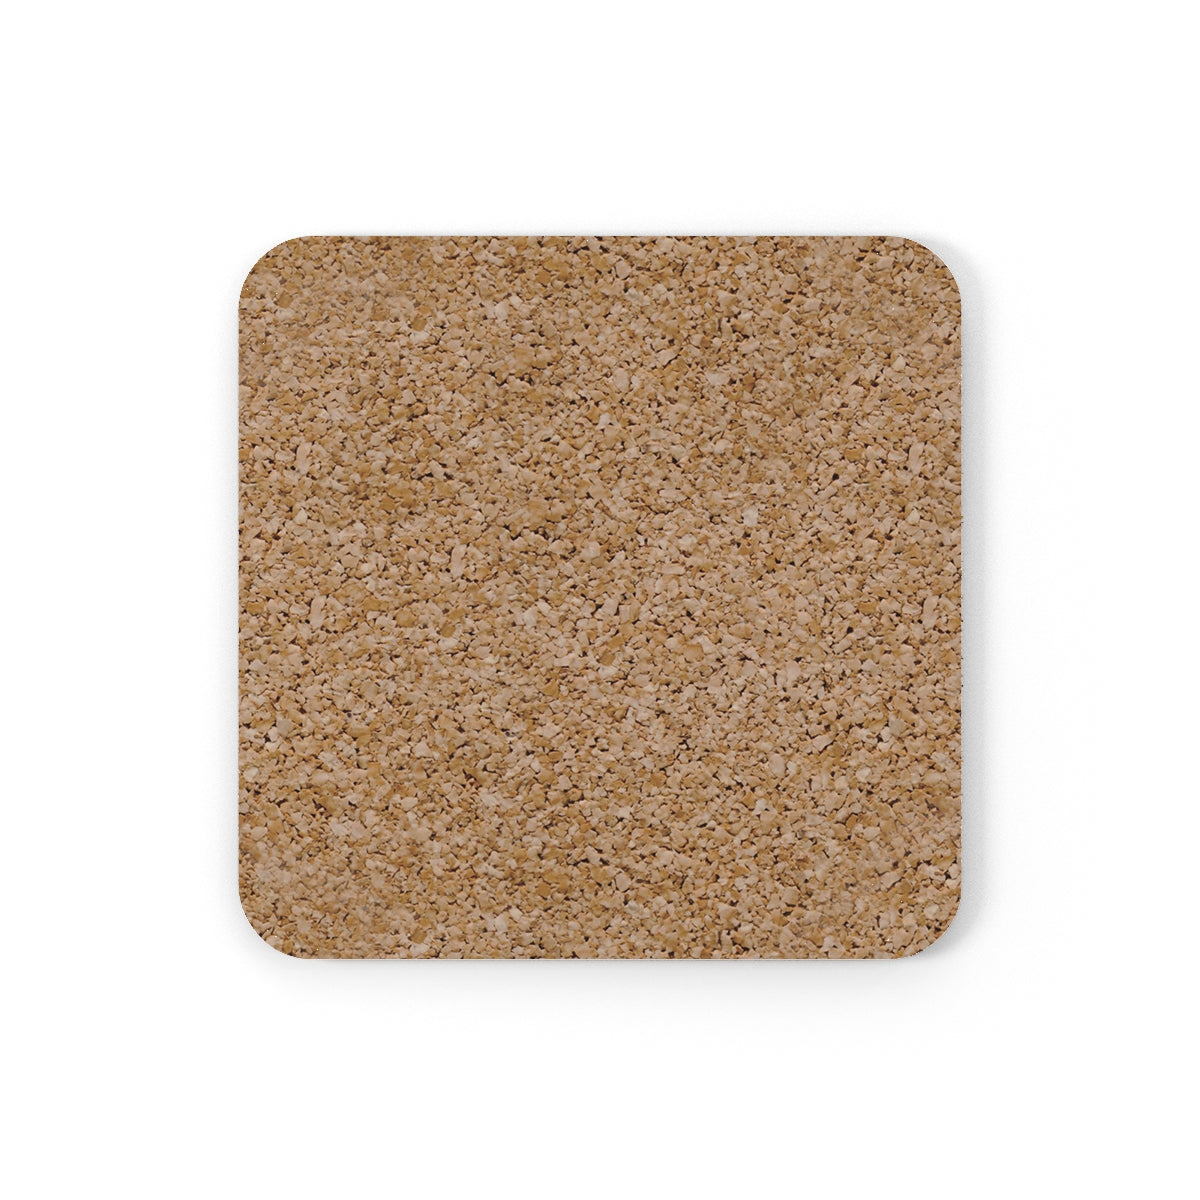 Unique drink coasters - Tommy - Cork Backed Coasters